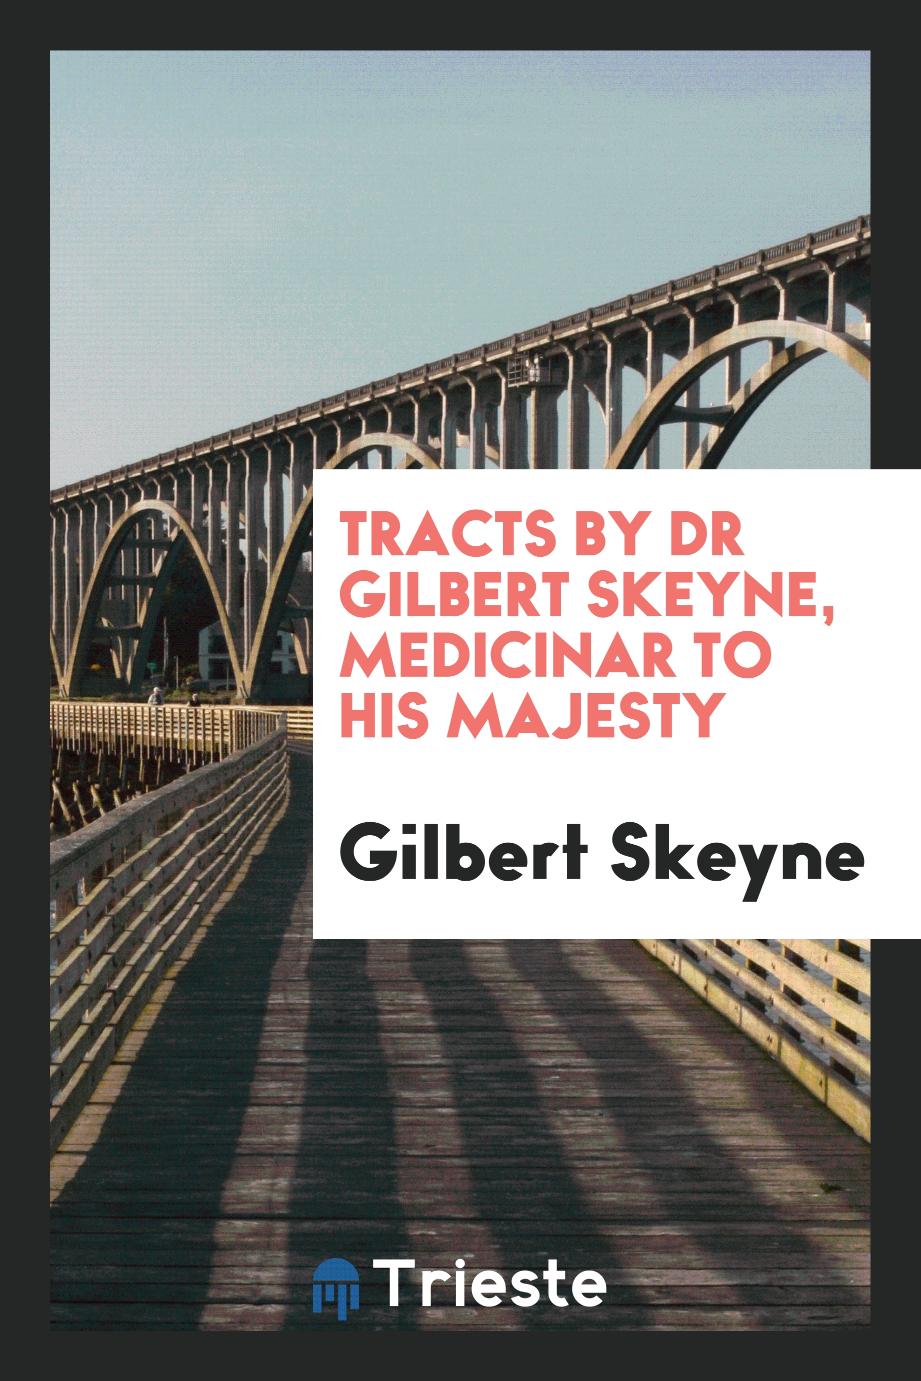 Tracts by Dr Gilbert Skeyne, Medicinar to His Majesty